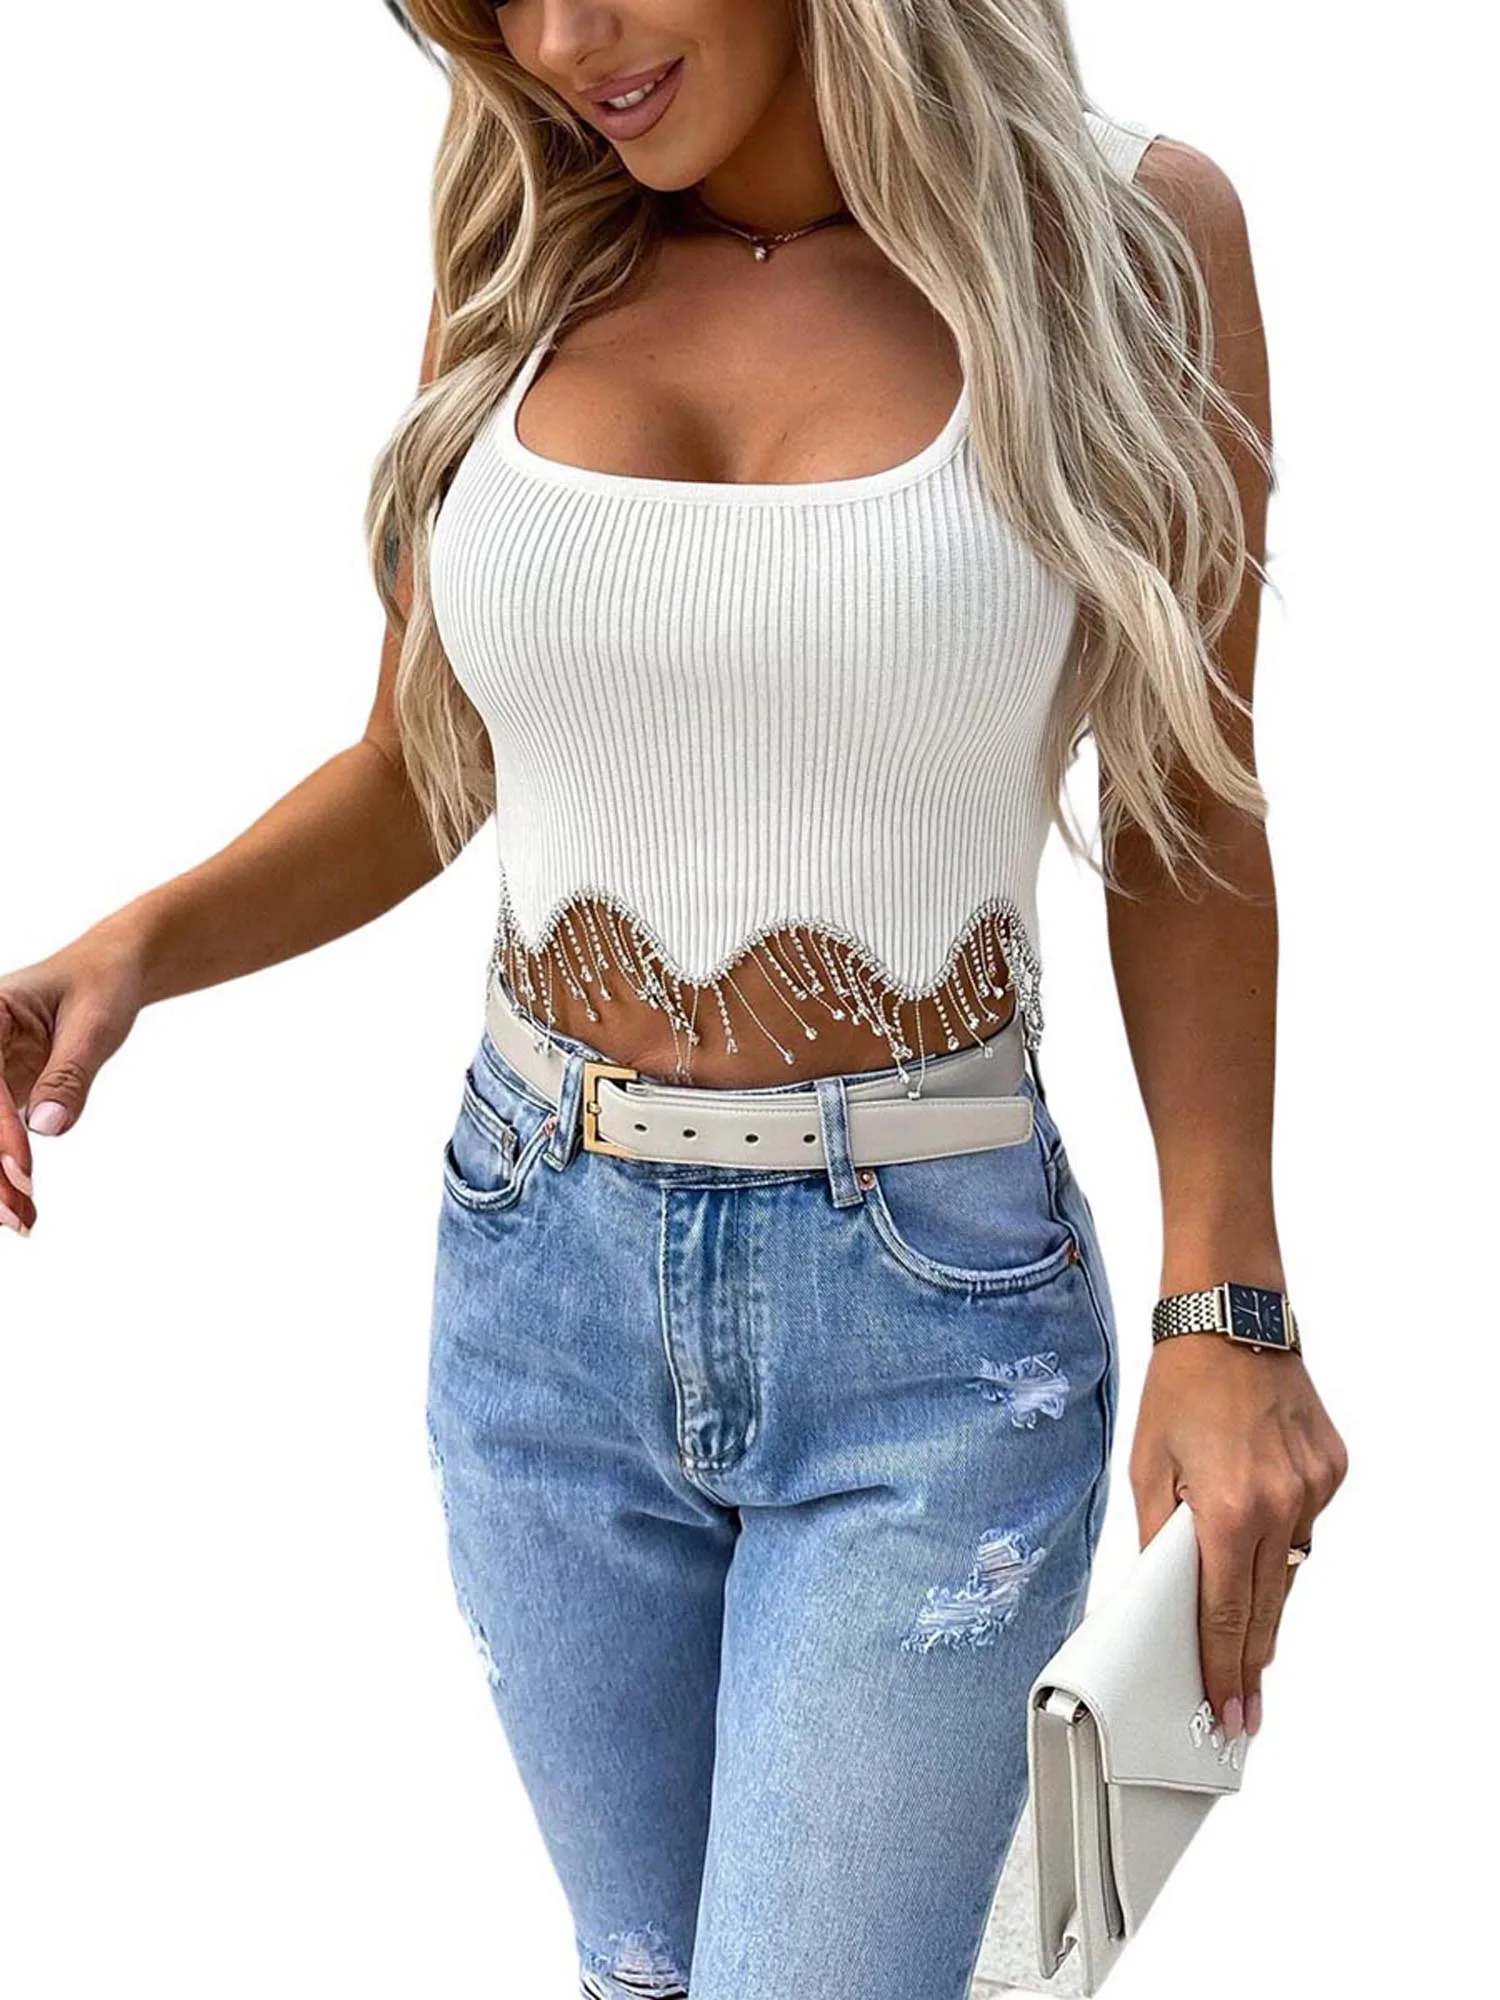 Elegant Tassel Embellished Square Neck Sleeveless Camisole Top with Rhinestones for Women s Summer Party Club Streetwear